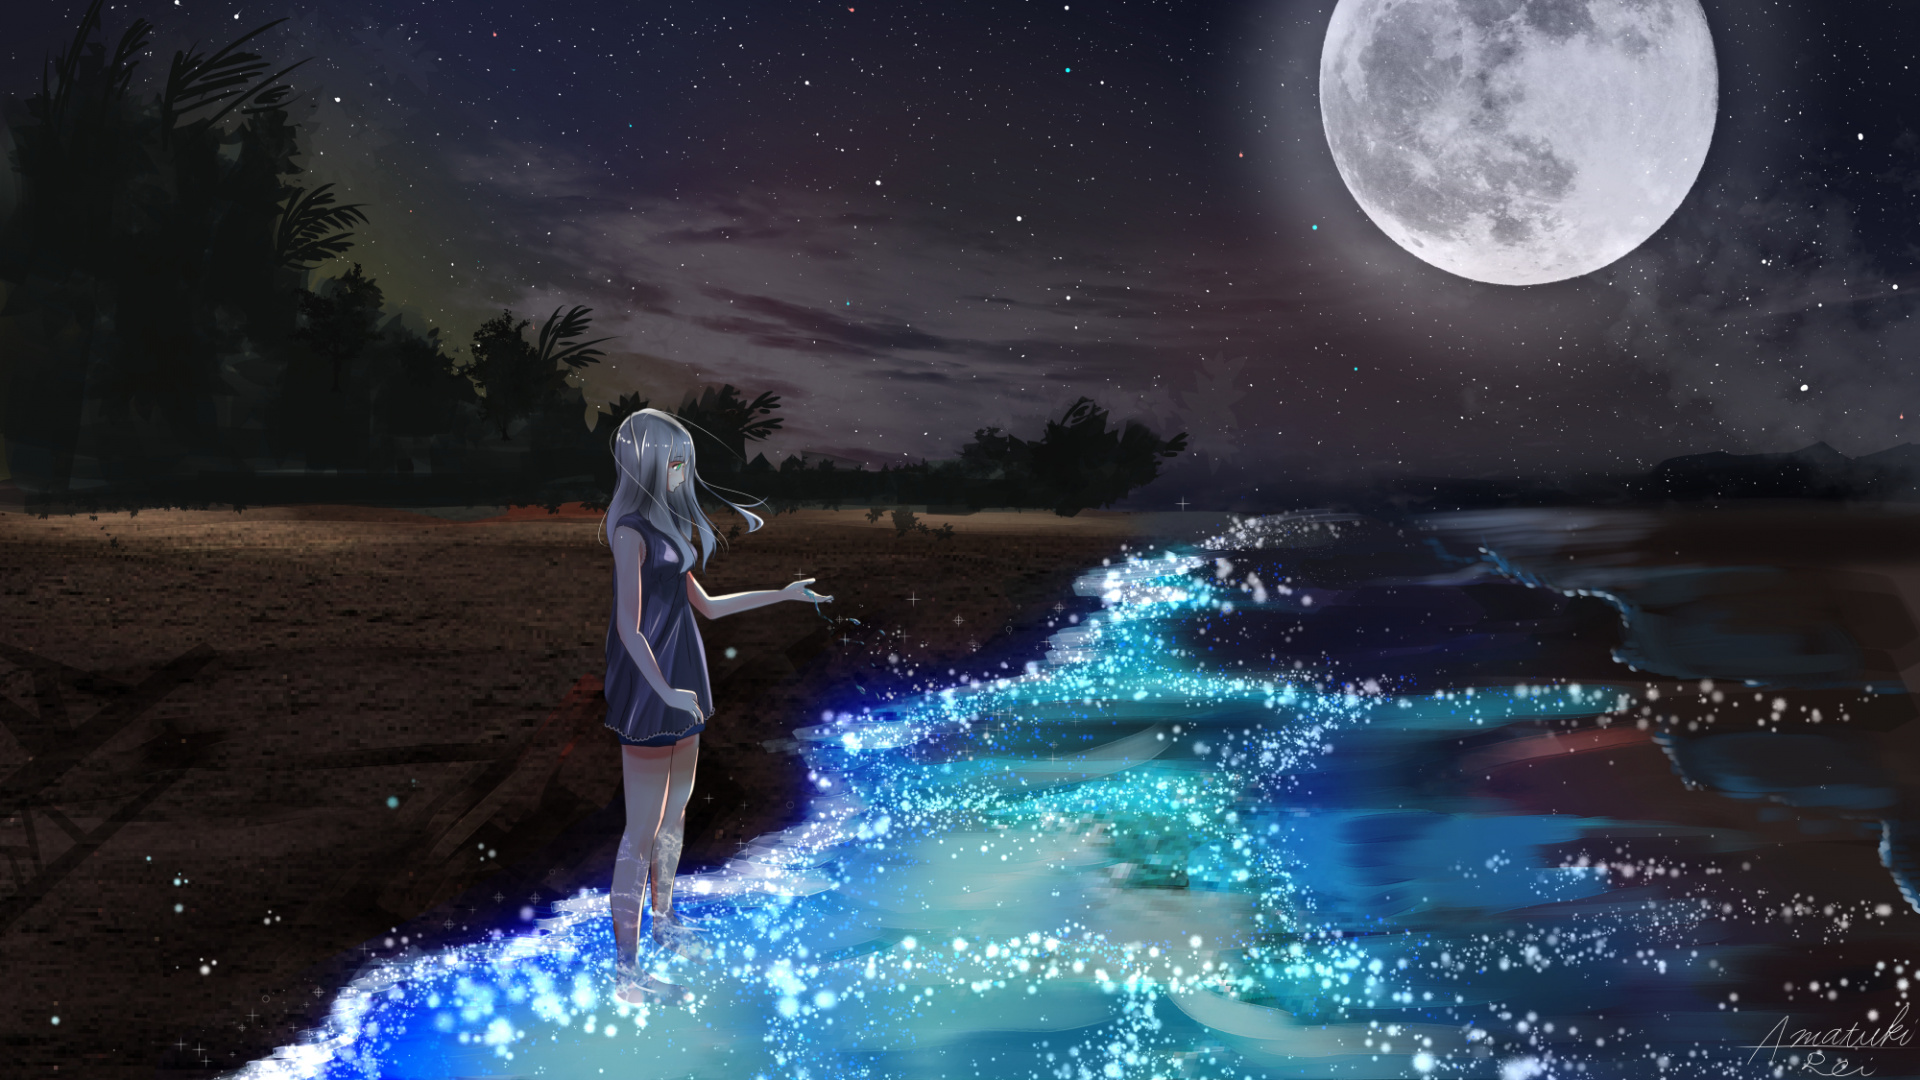 Woman in White Long Sleeve Shirt and Blue Denim Shorts Standing on Seashore During Night Time. Wallpaper in 1920x1080 Resolution